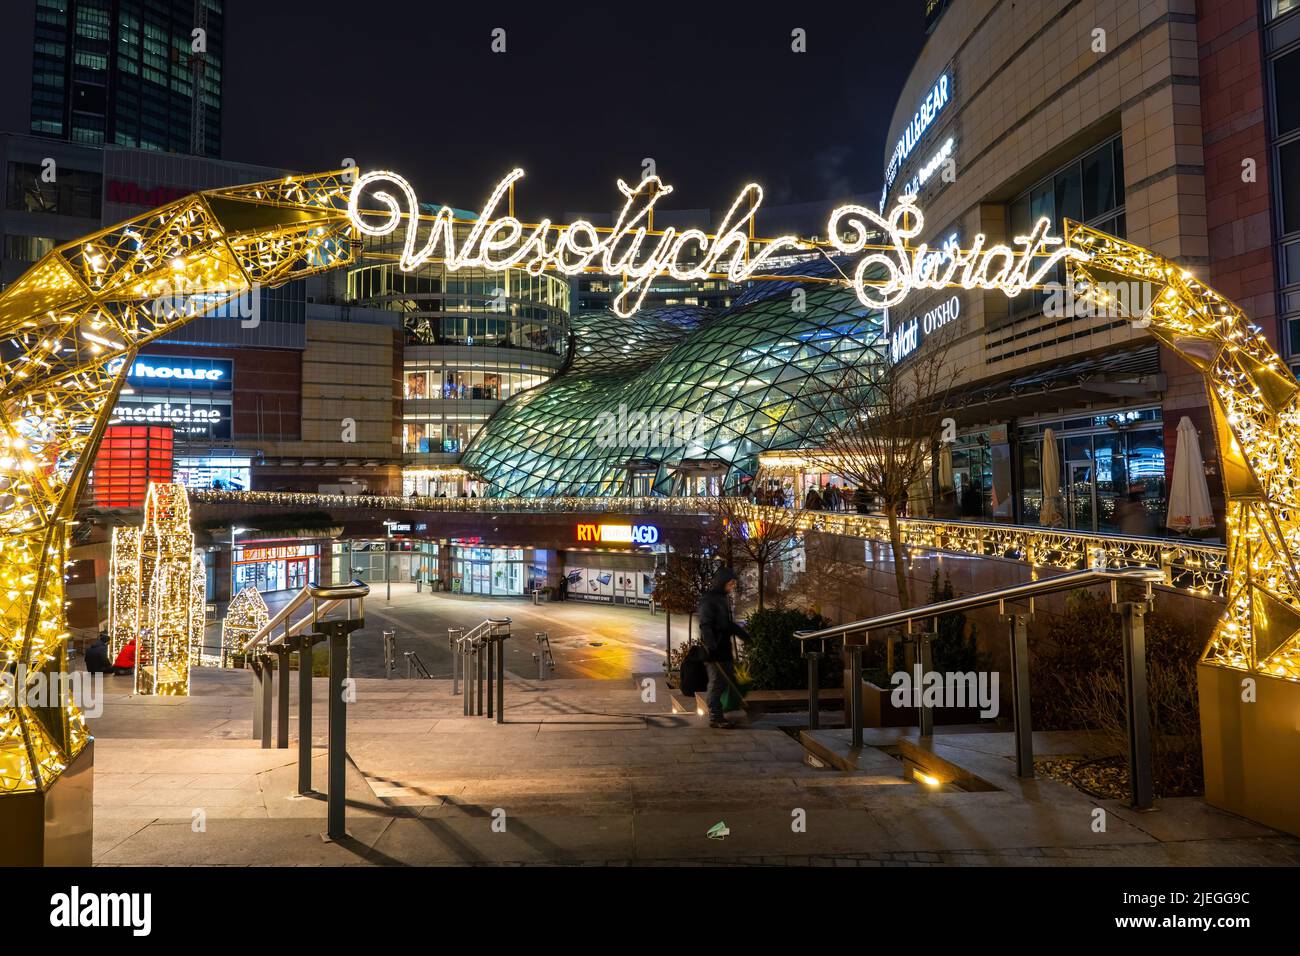 Warsaw, Poland - December 14, 2020: Zlote Tarasy (Golden Terraces) shopping mall and entertainment complex at night in the city center during winter h Stock Photo